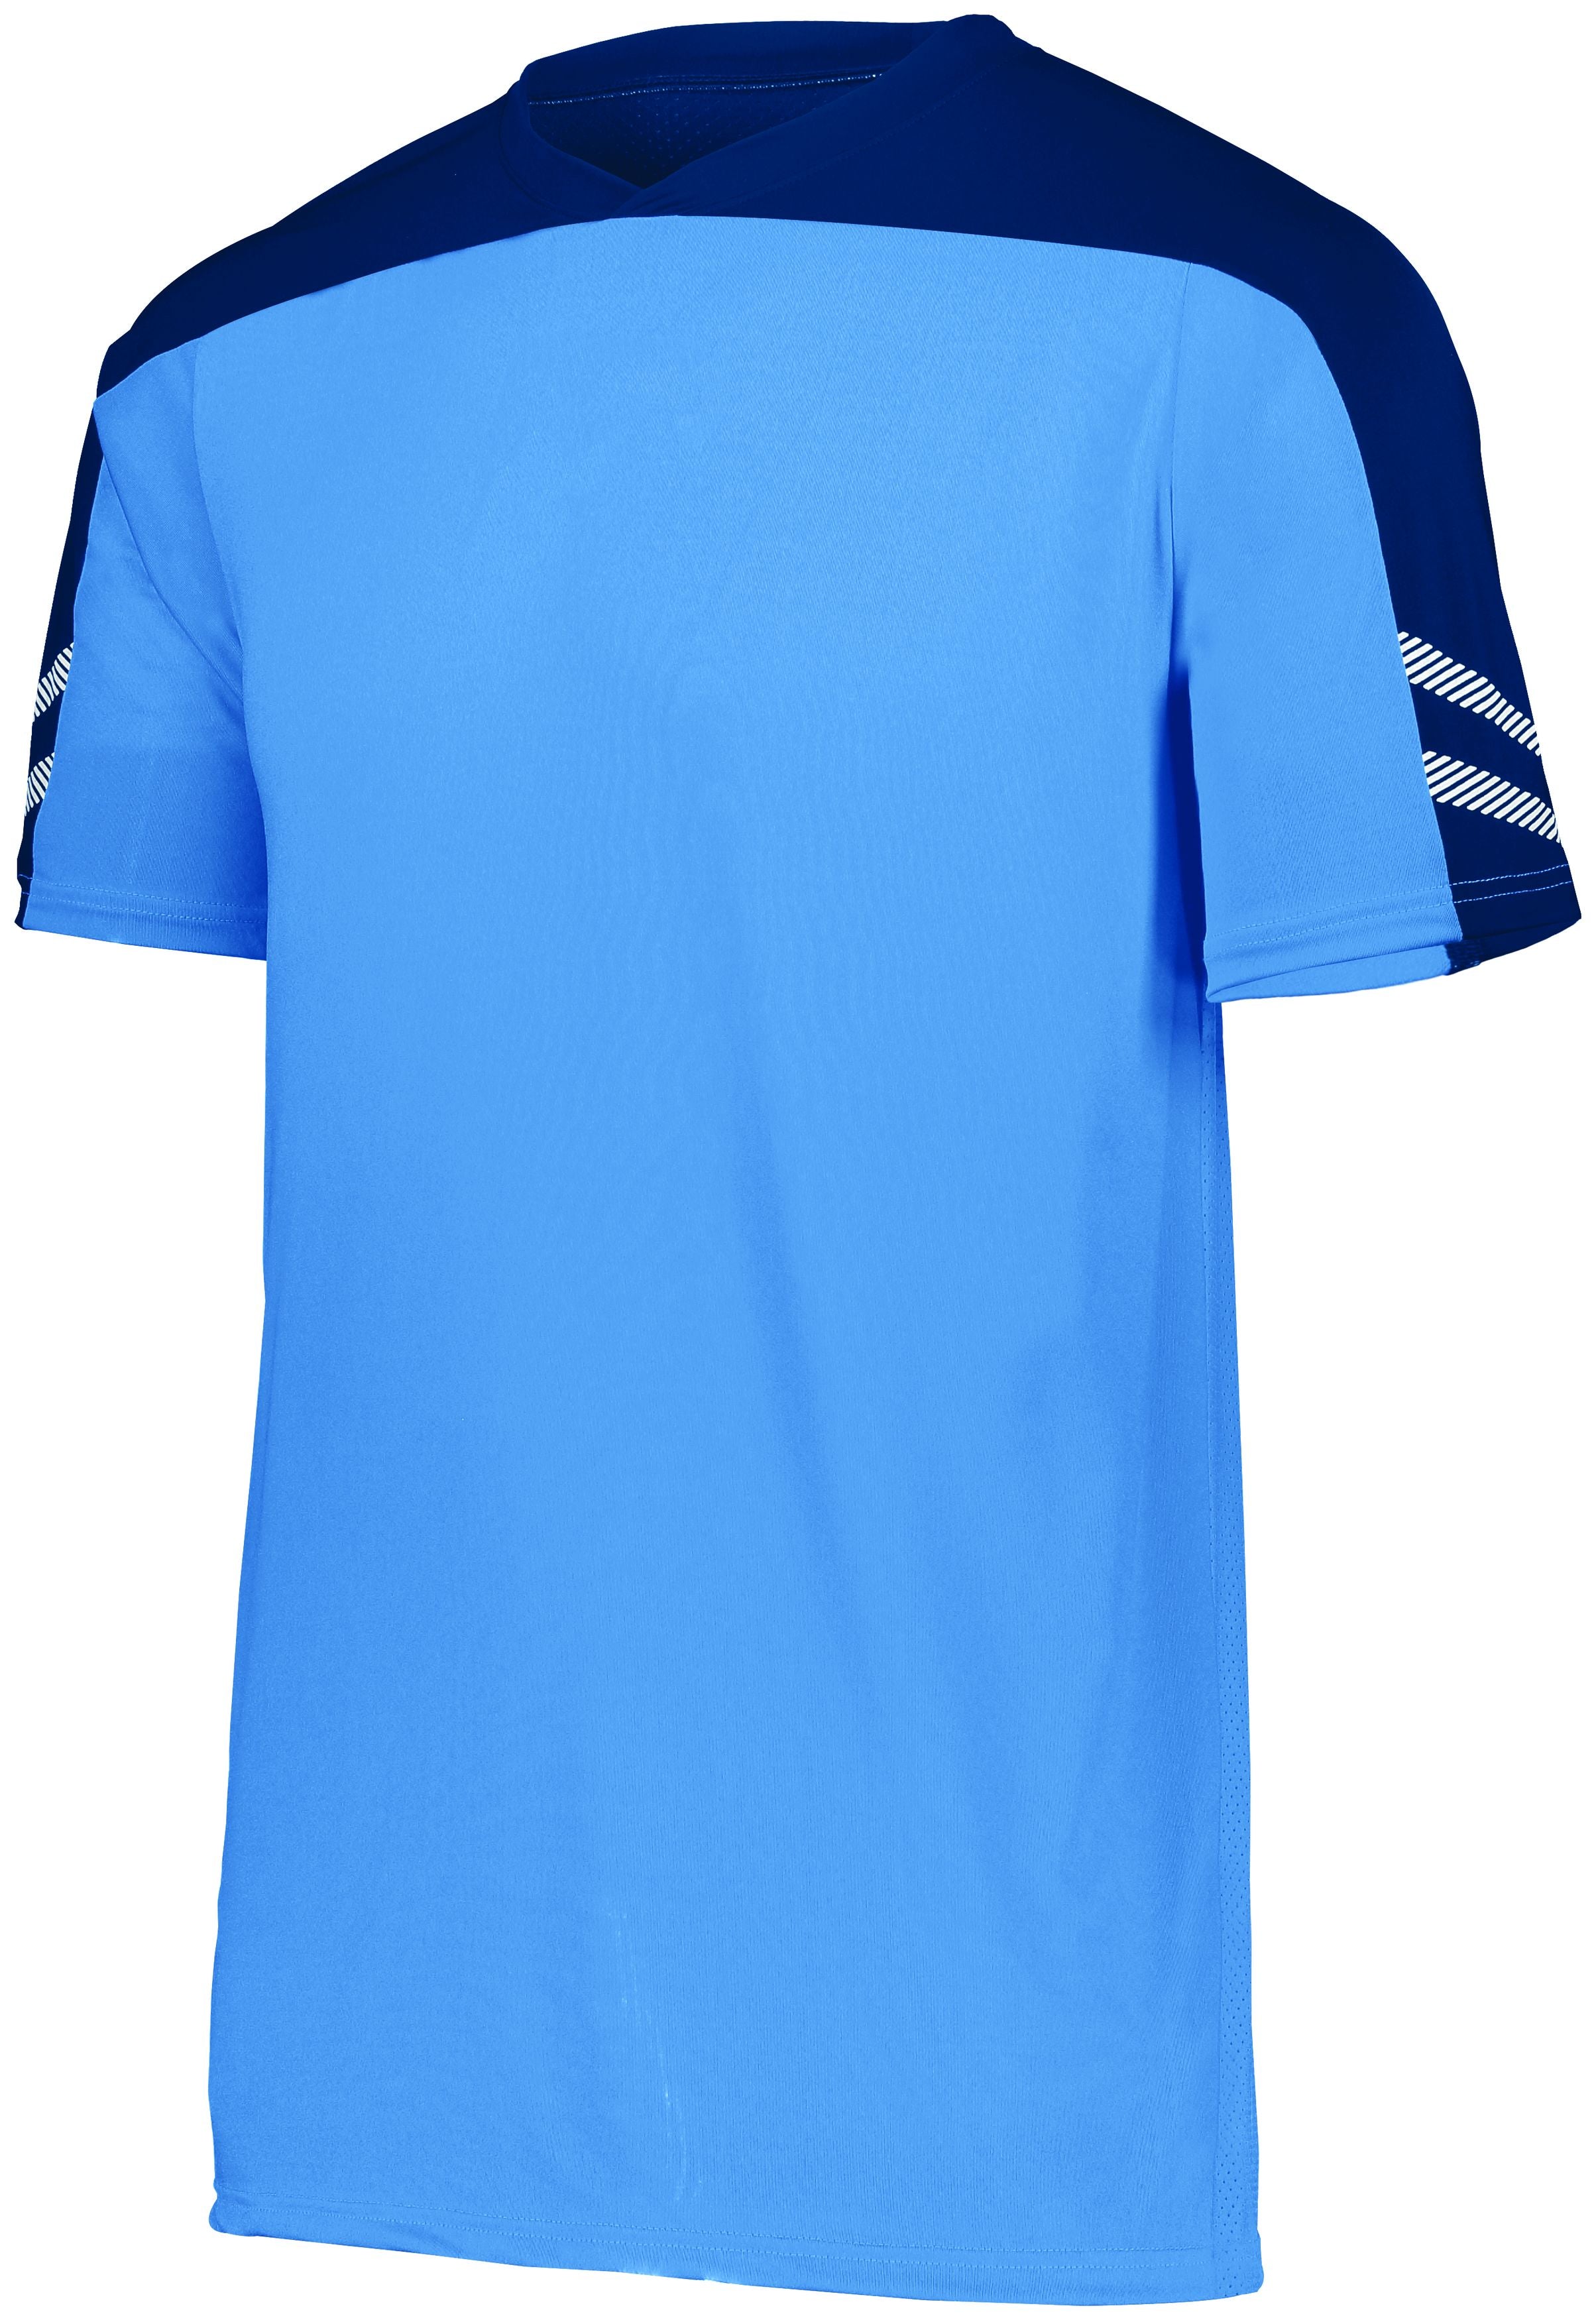 High 5 Anfield Soccer Jersey in Columbia Blue/Navy/White  -Part of the Adult, Adult-Jersey, High5-Products, Soccer, Shirts, All-Sports-1 product lines at KanaleyCreations.com